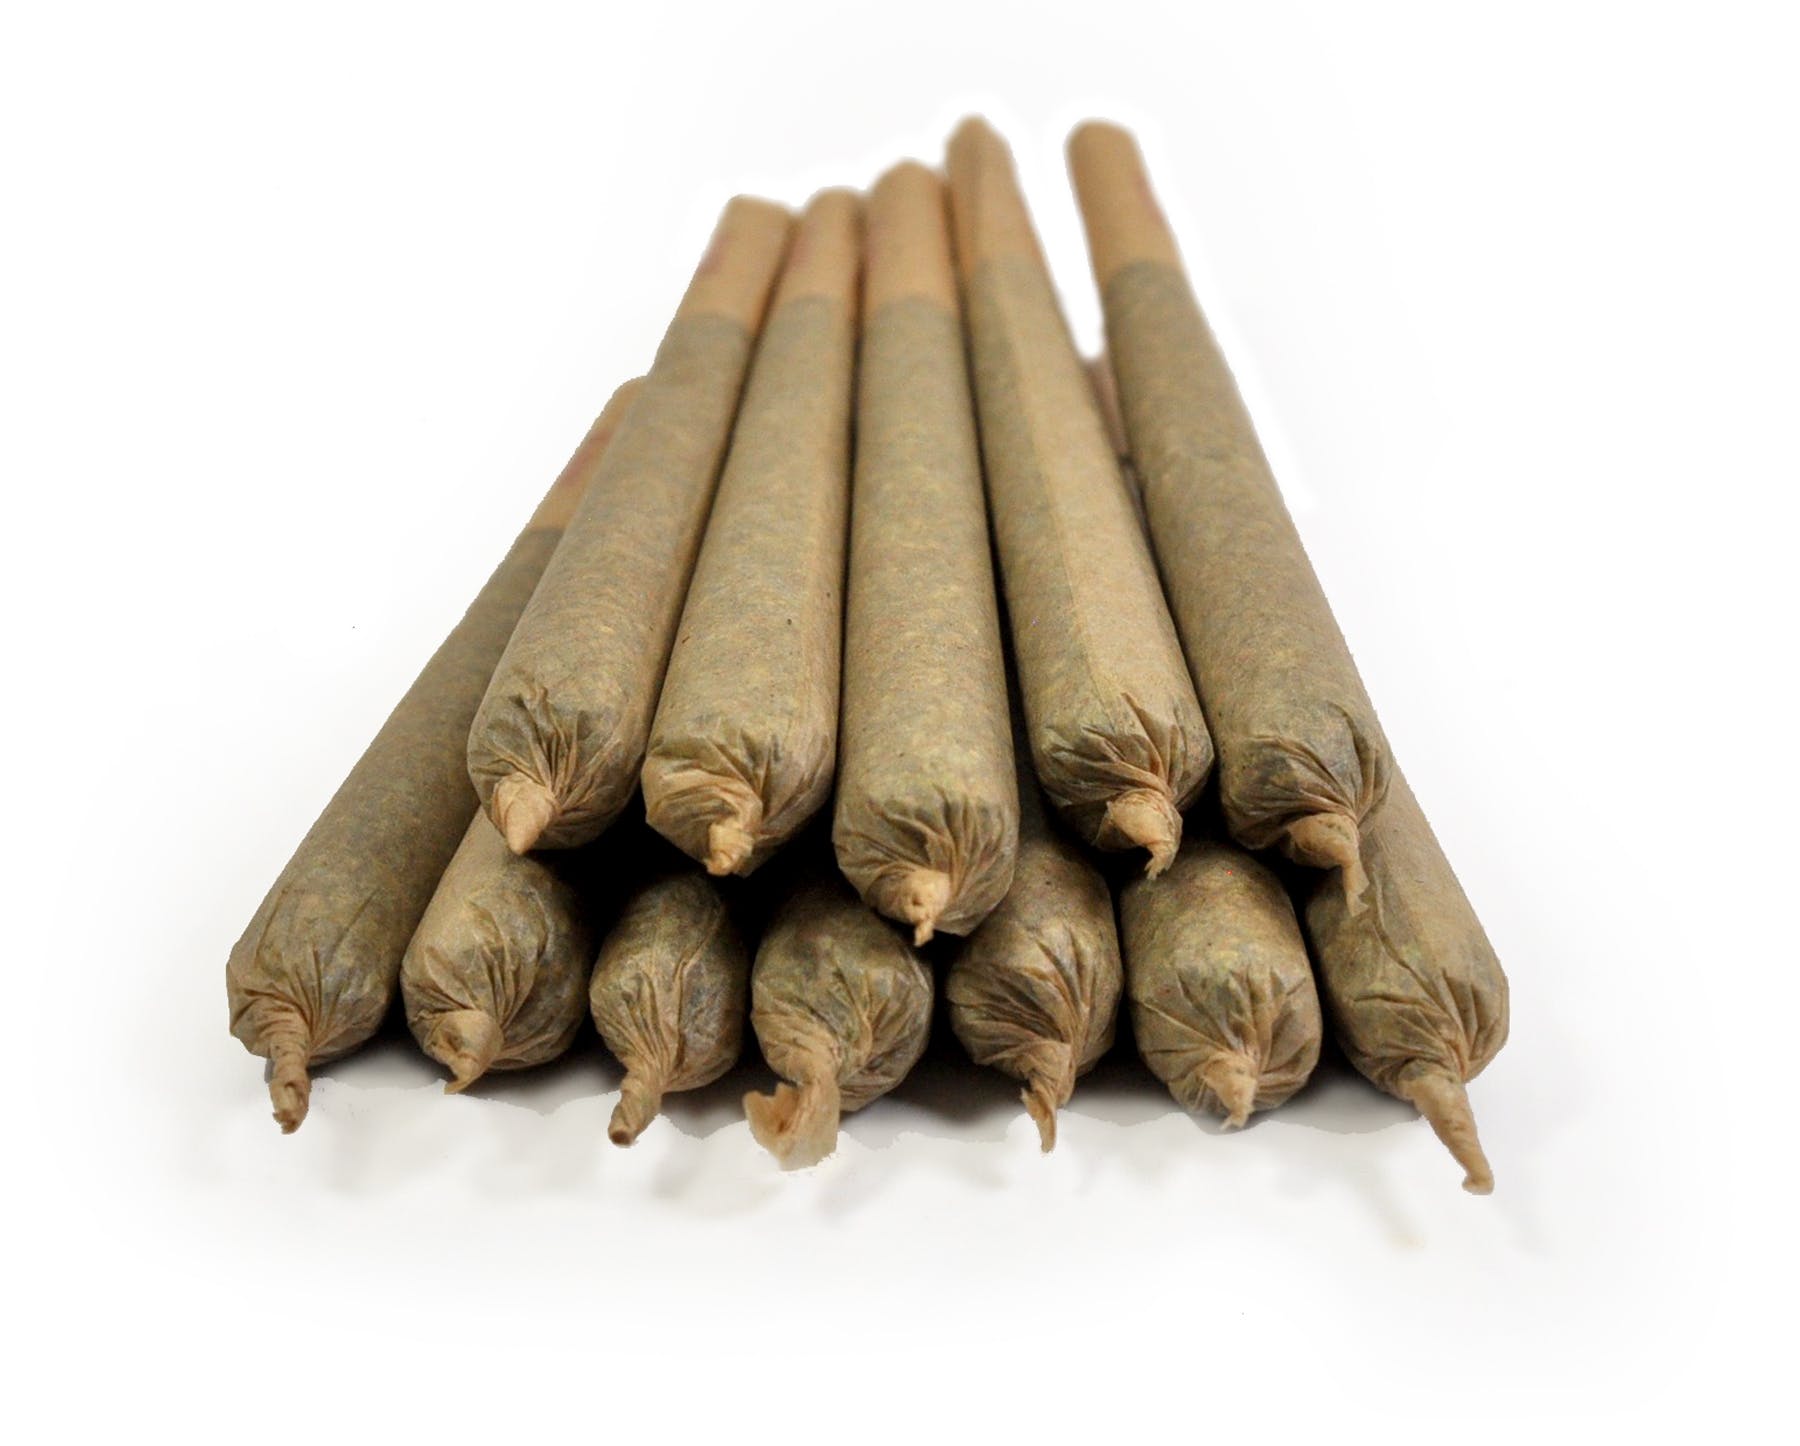 preroll-top-shelf-joints-indica-5-for-20